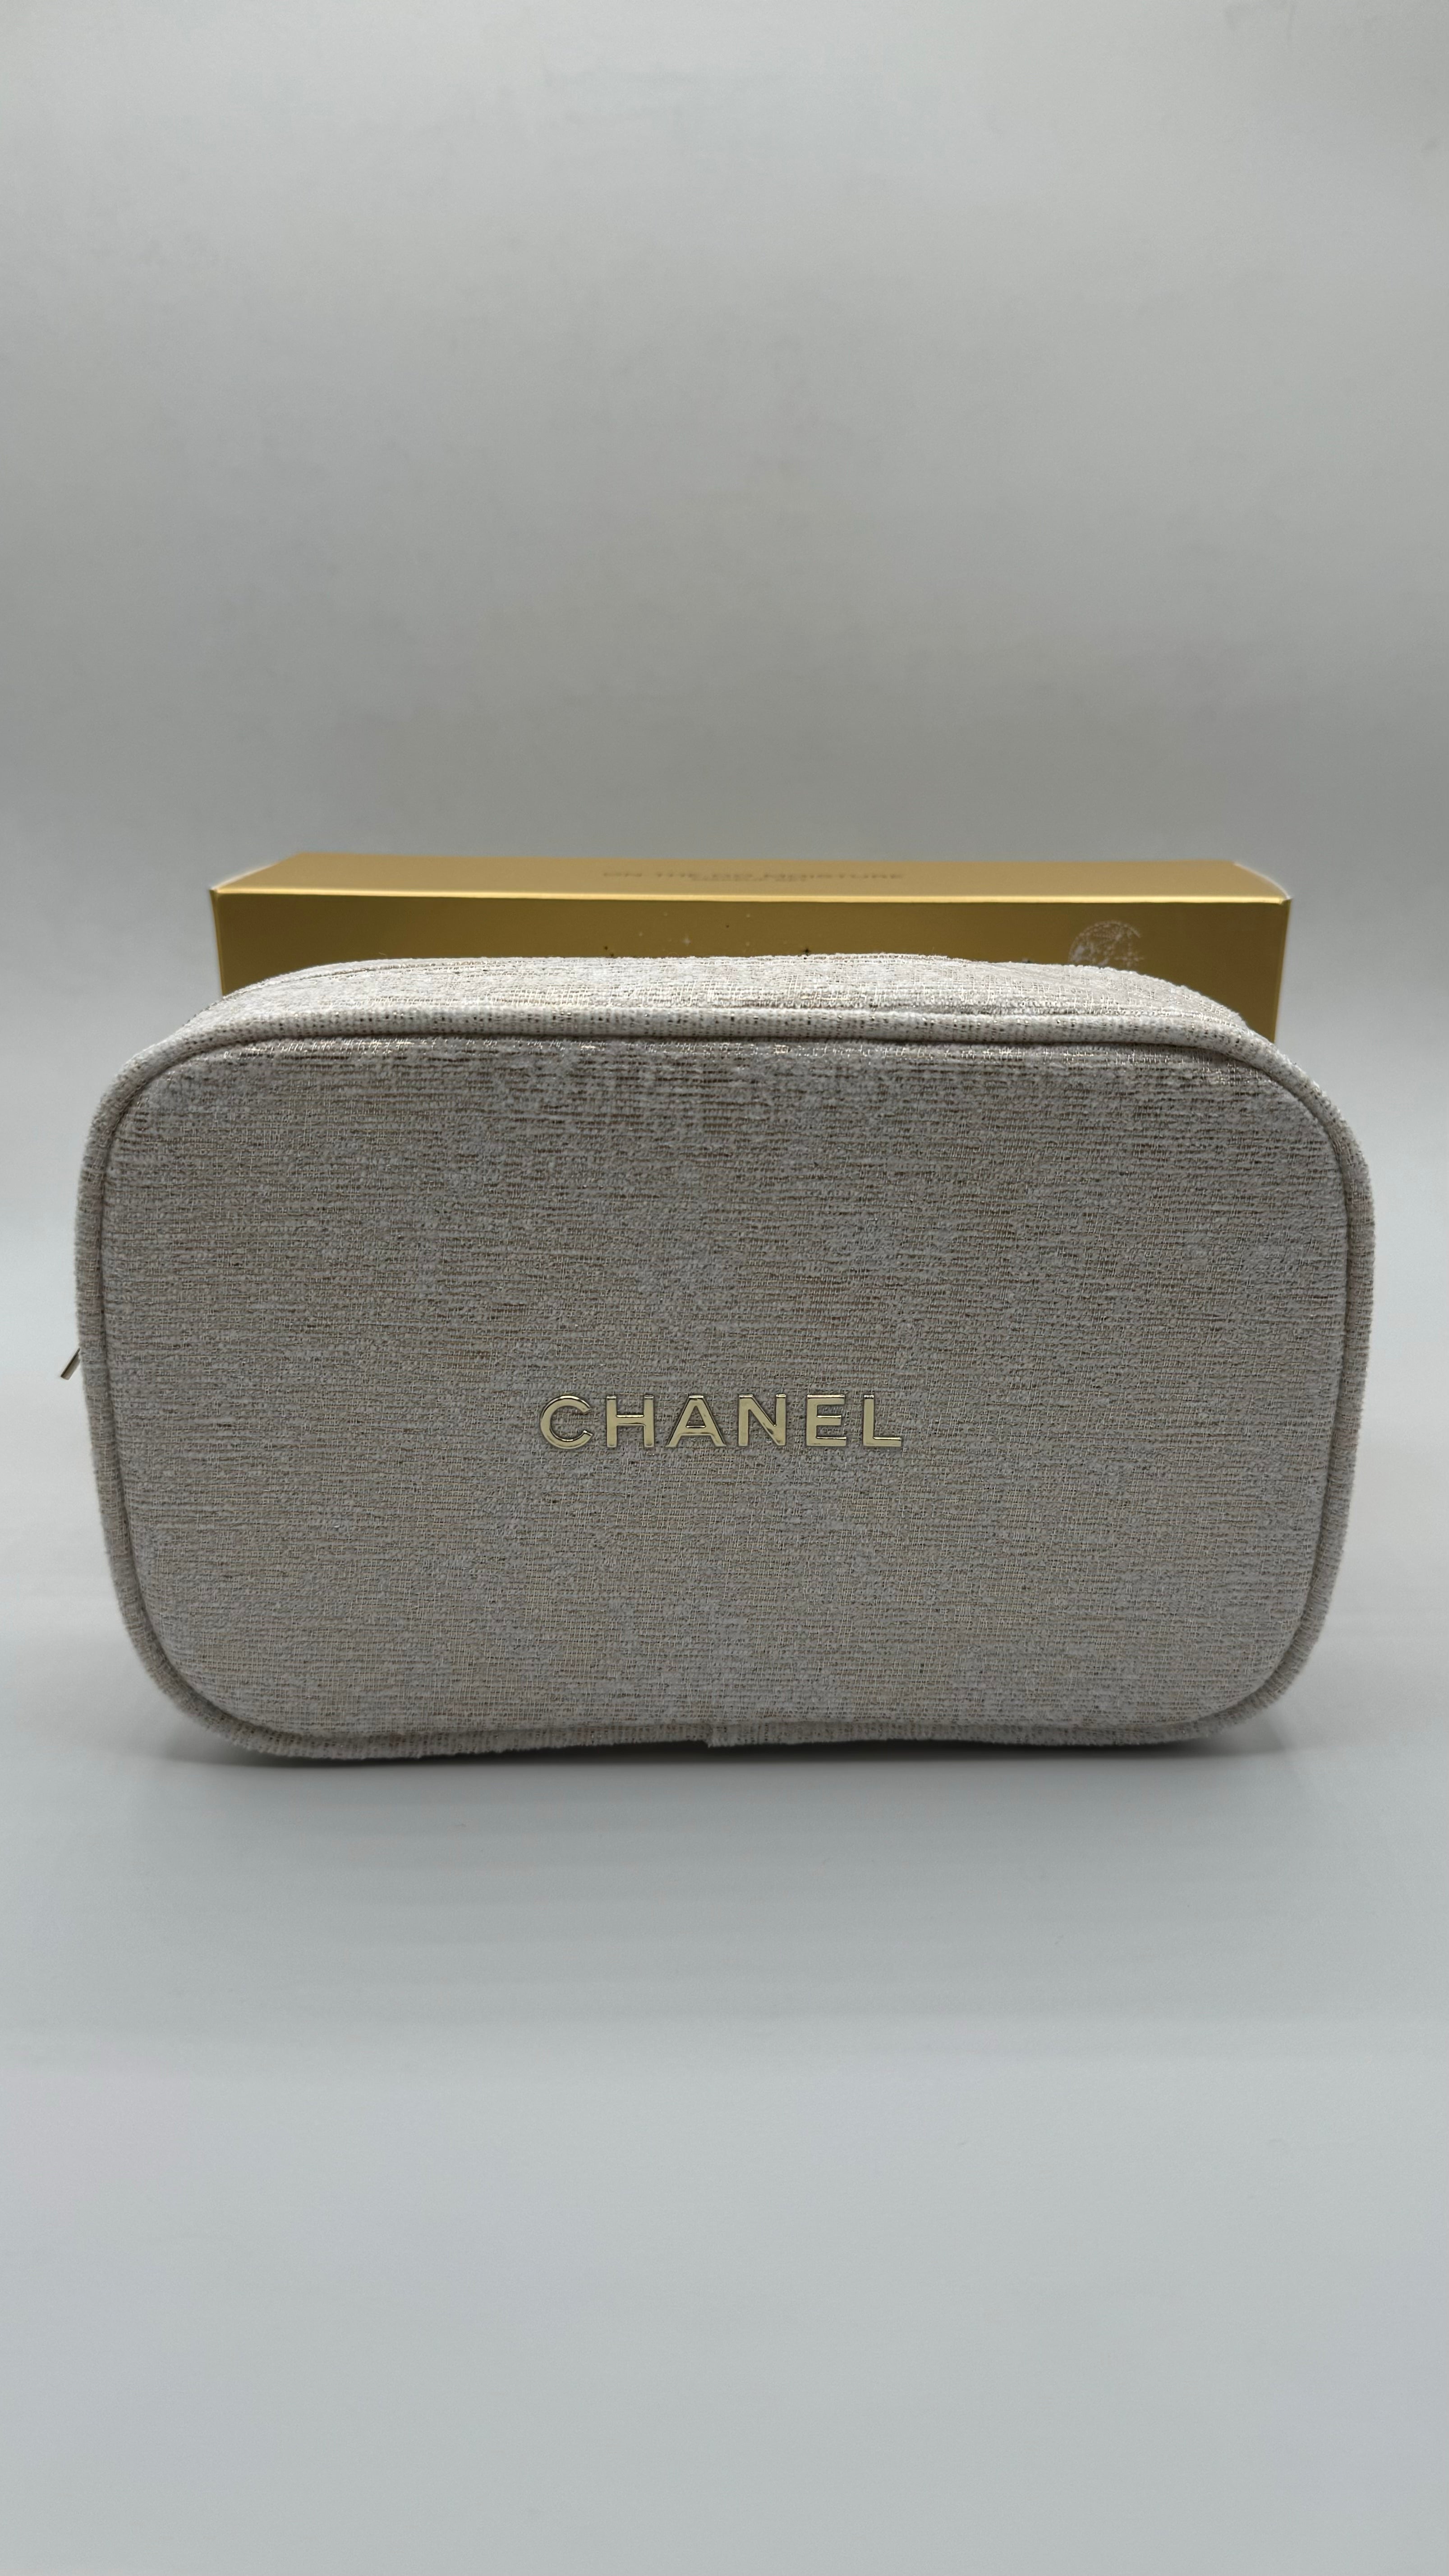 RESALE CHANEL MYSTERY MAKEUP BAG W/GOODIES INSIDE!